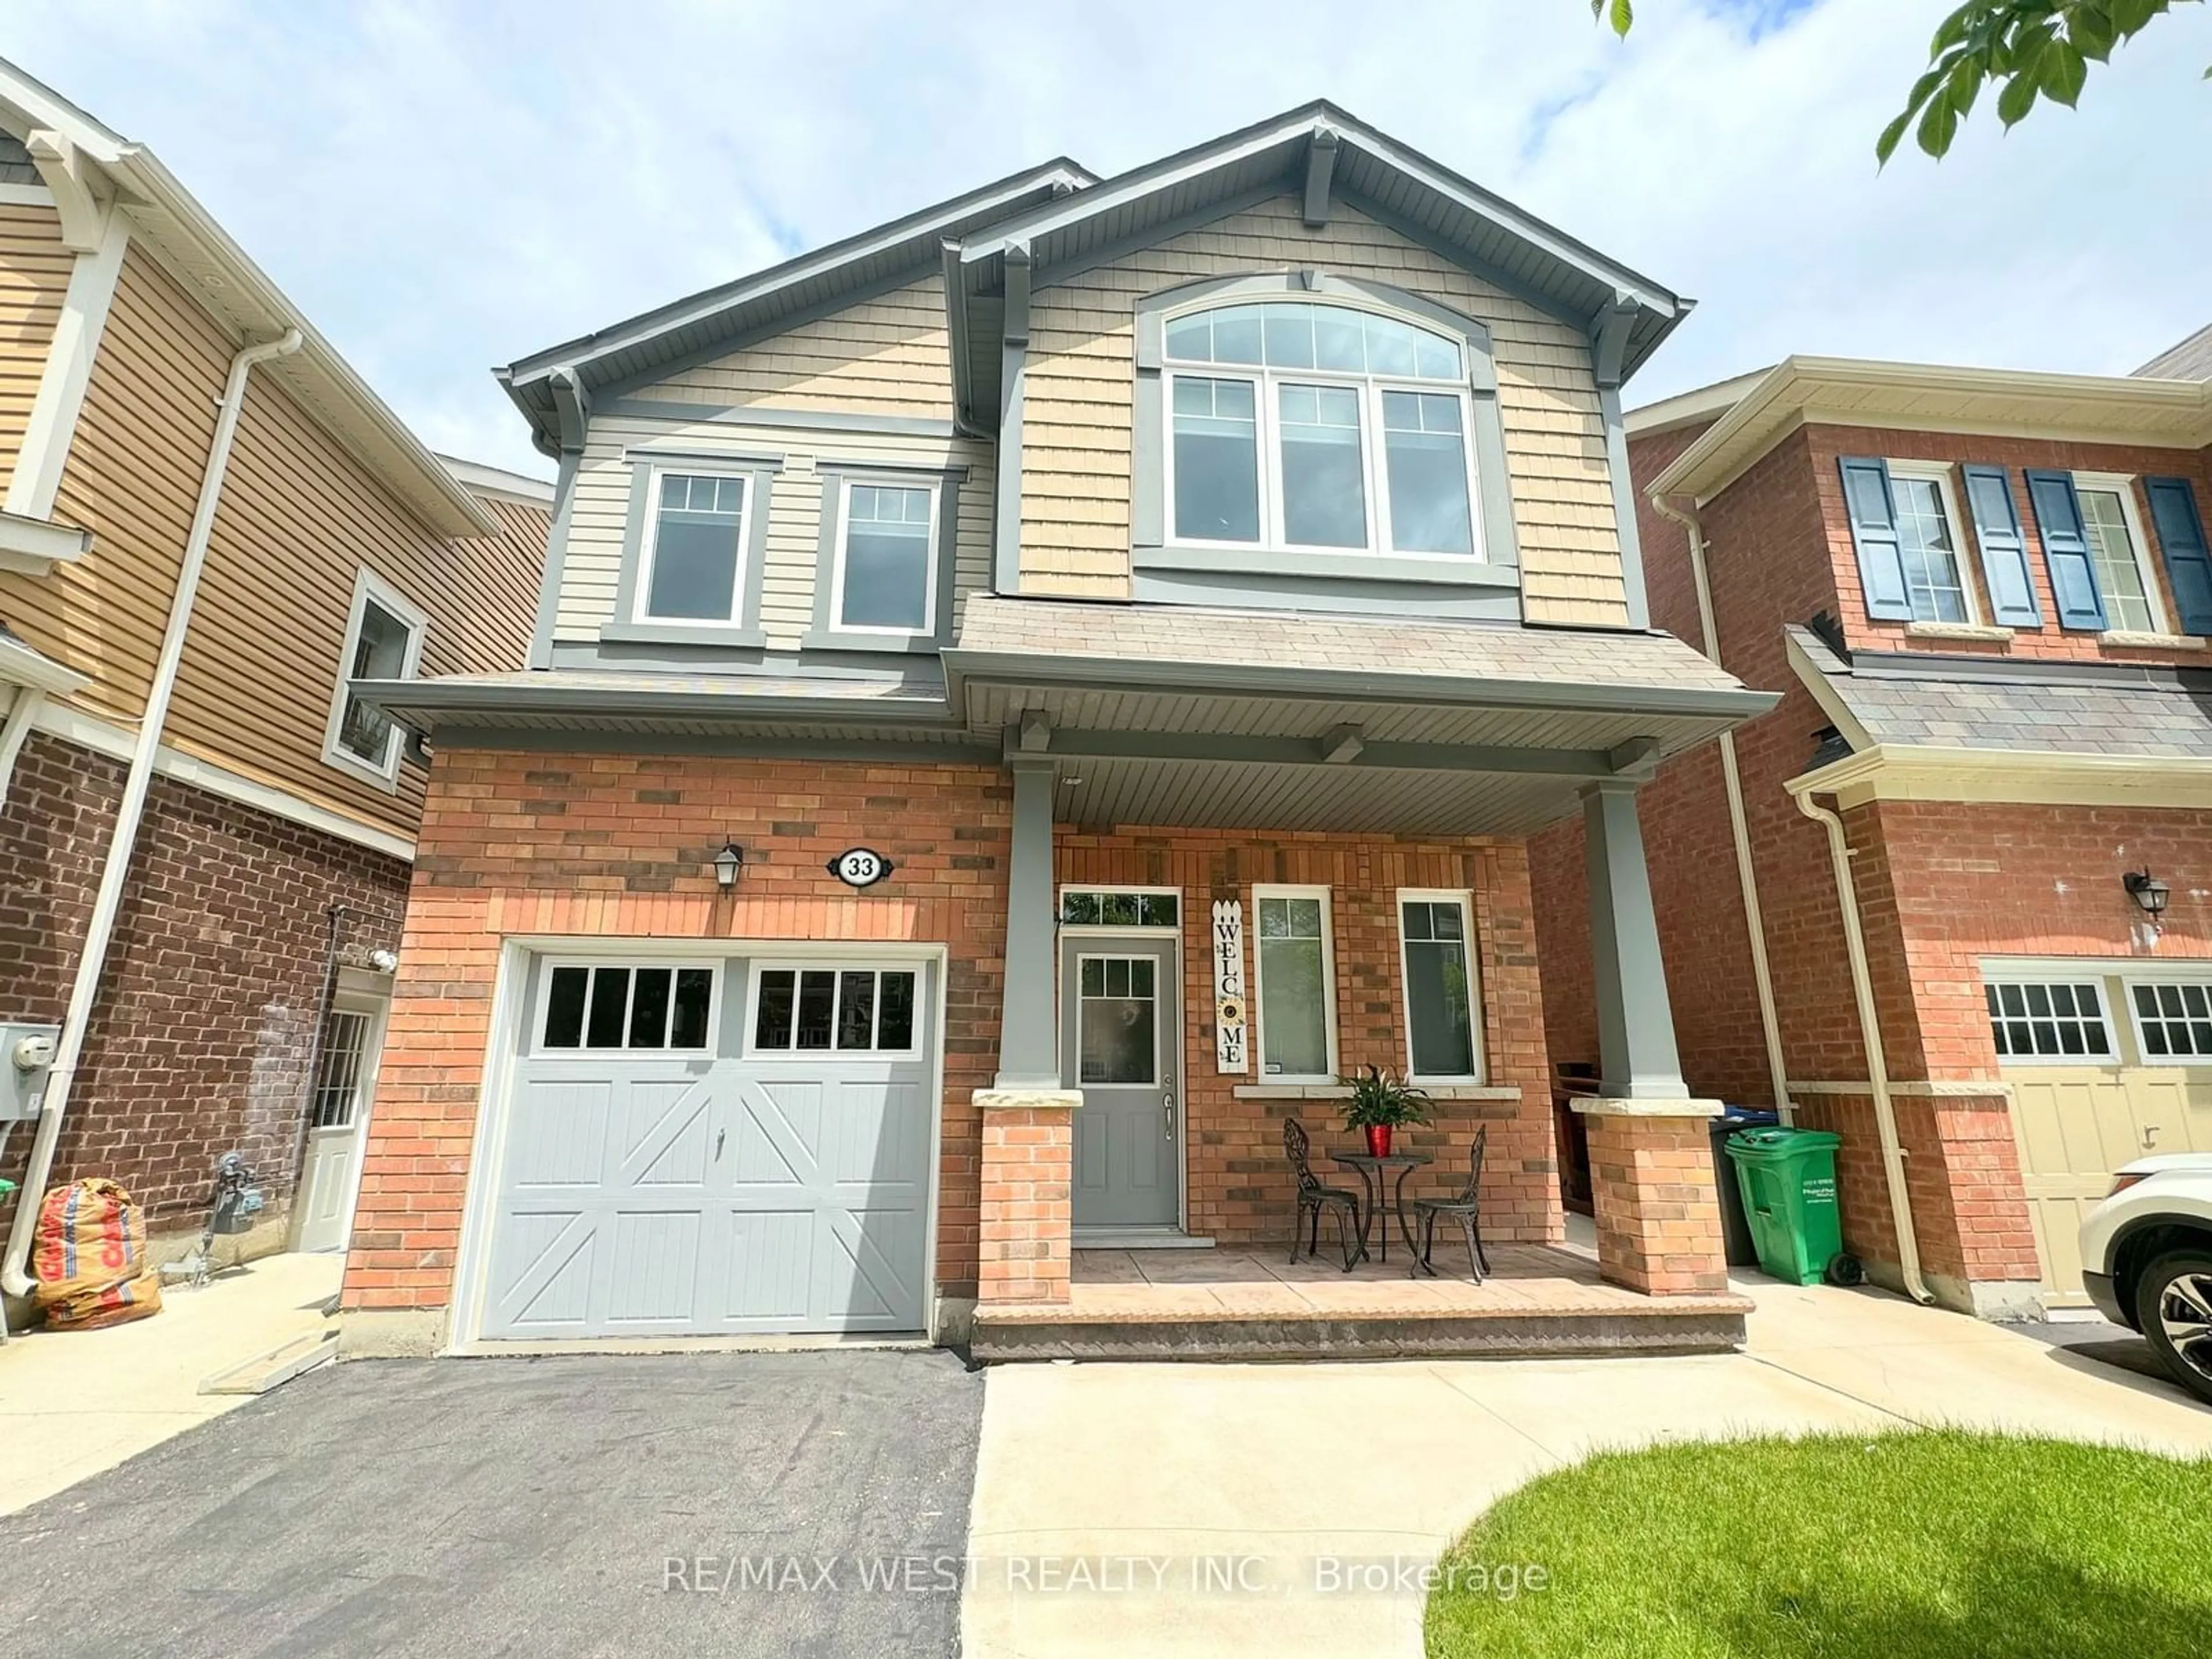 Home with brick exterior material for 33 Feeder St, Brampton Ontario L7A 4T9